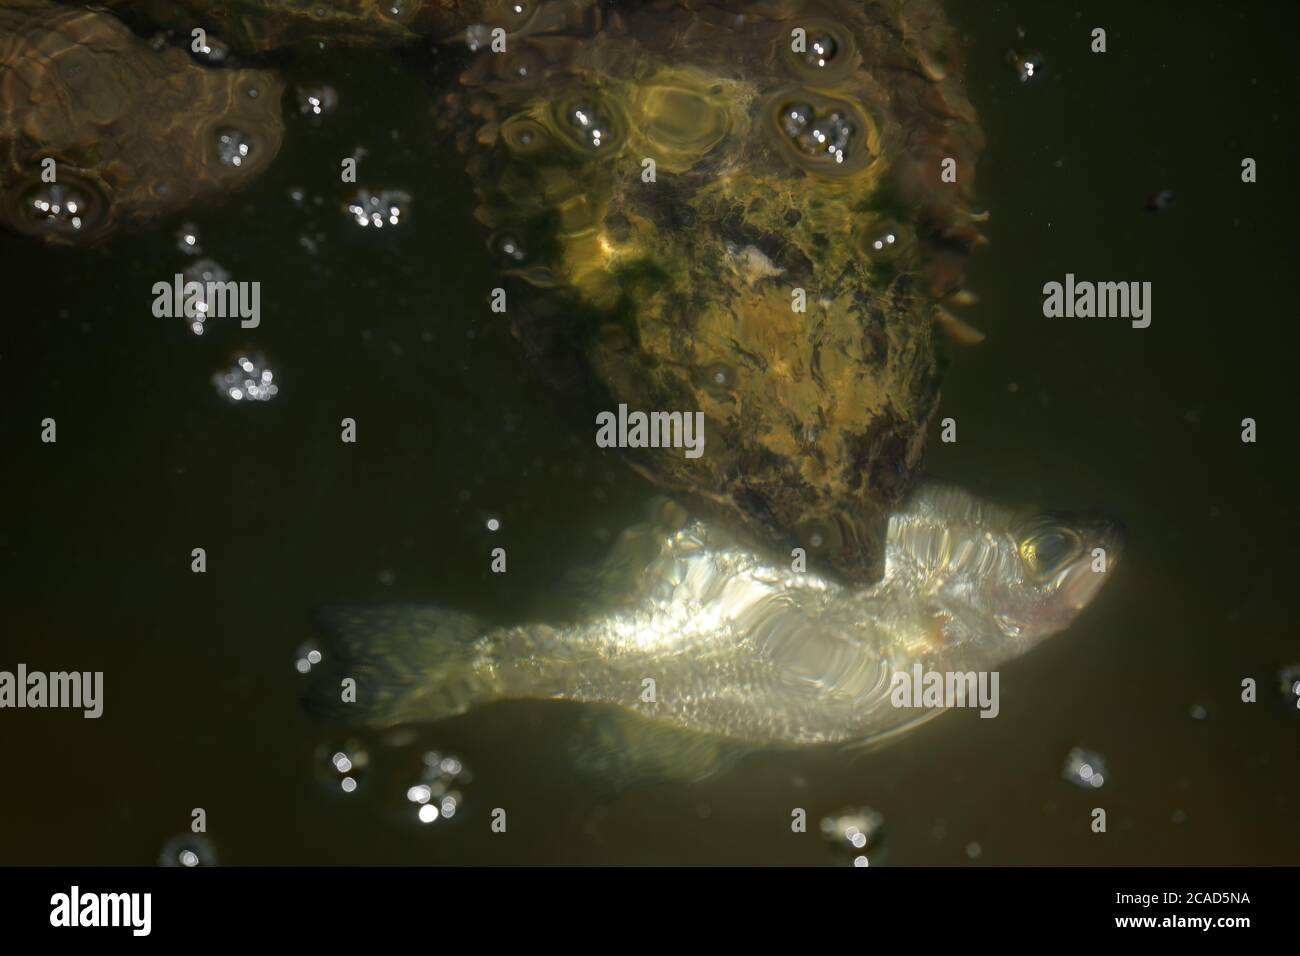 Snapping turtle, Chelydra serpentina, Maryland, feeding on dead white crappie Stock Photo